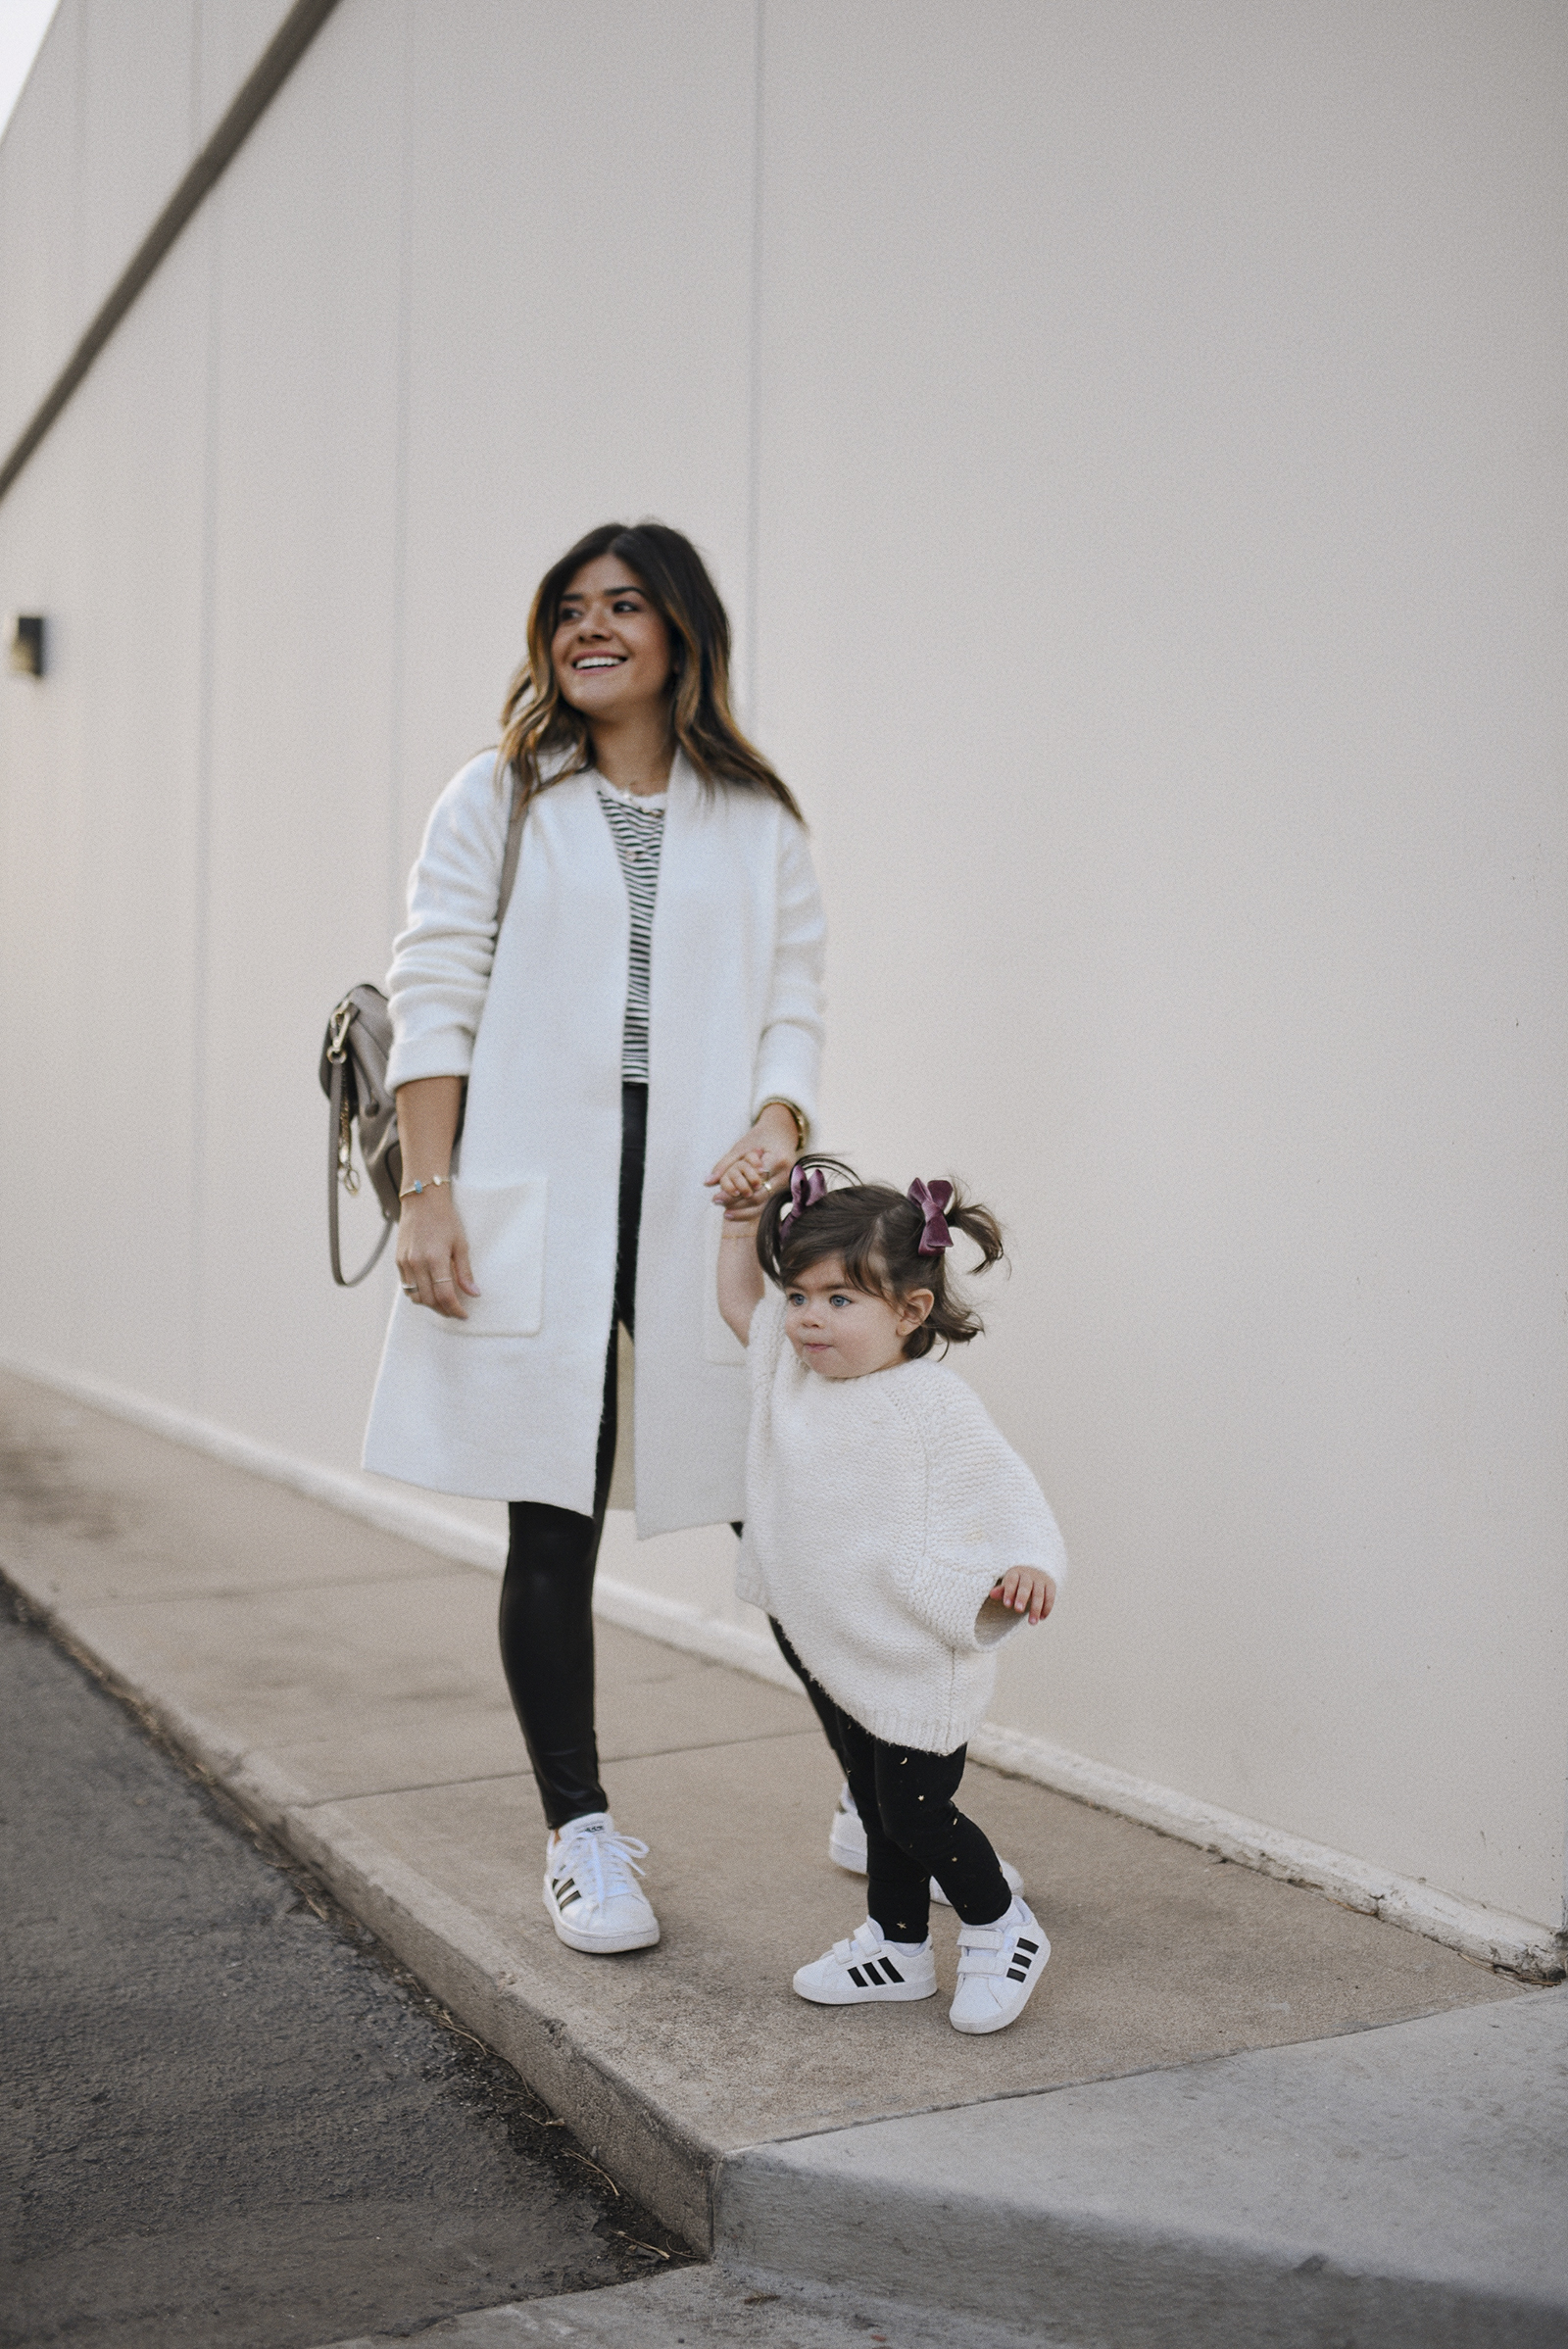 Carolina Hellal of Chic Talk and her daughter Sofia Jaramillo-Hellal wearing matching outfits in Adidas white sneakers